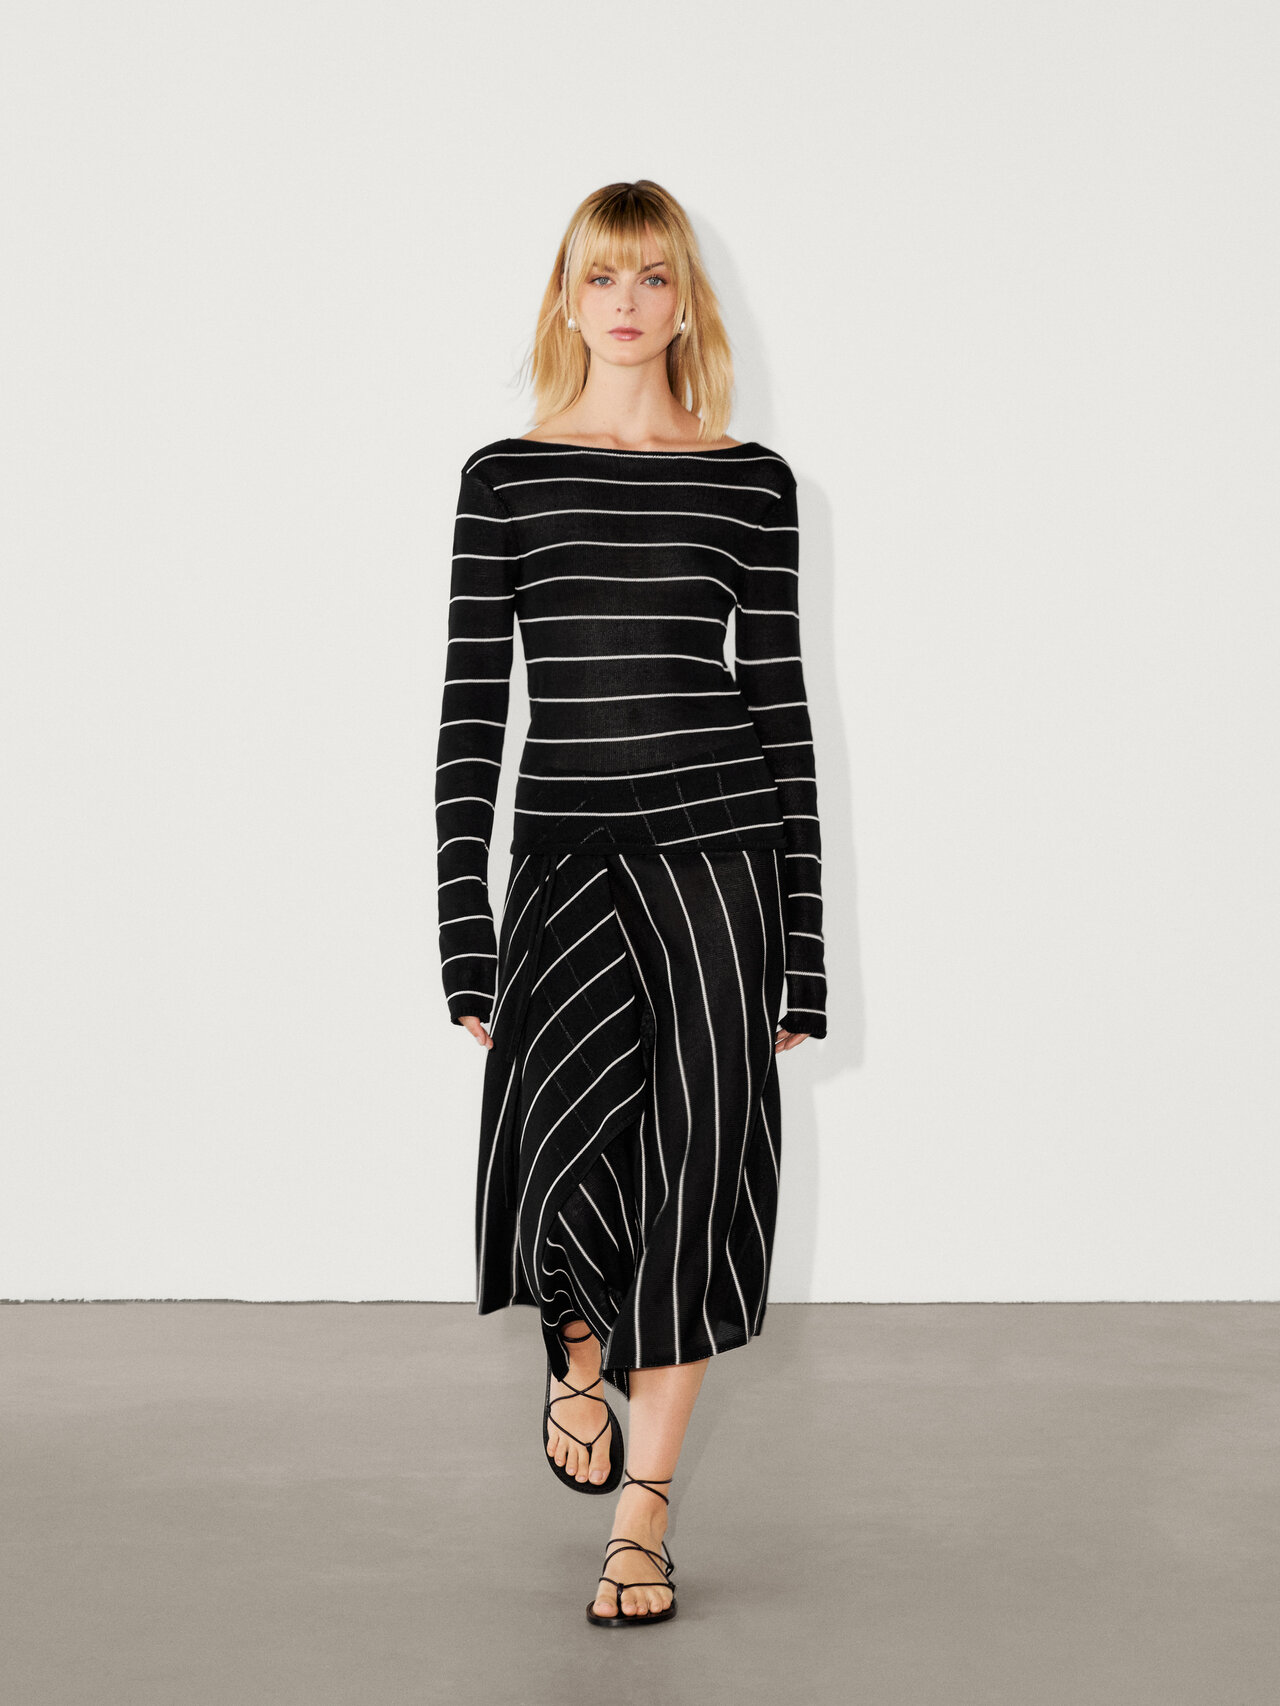 Striped knit co-ord skirt with tie